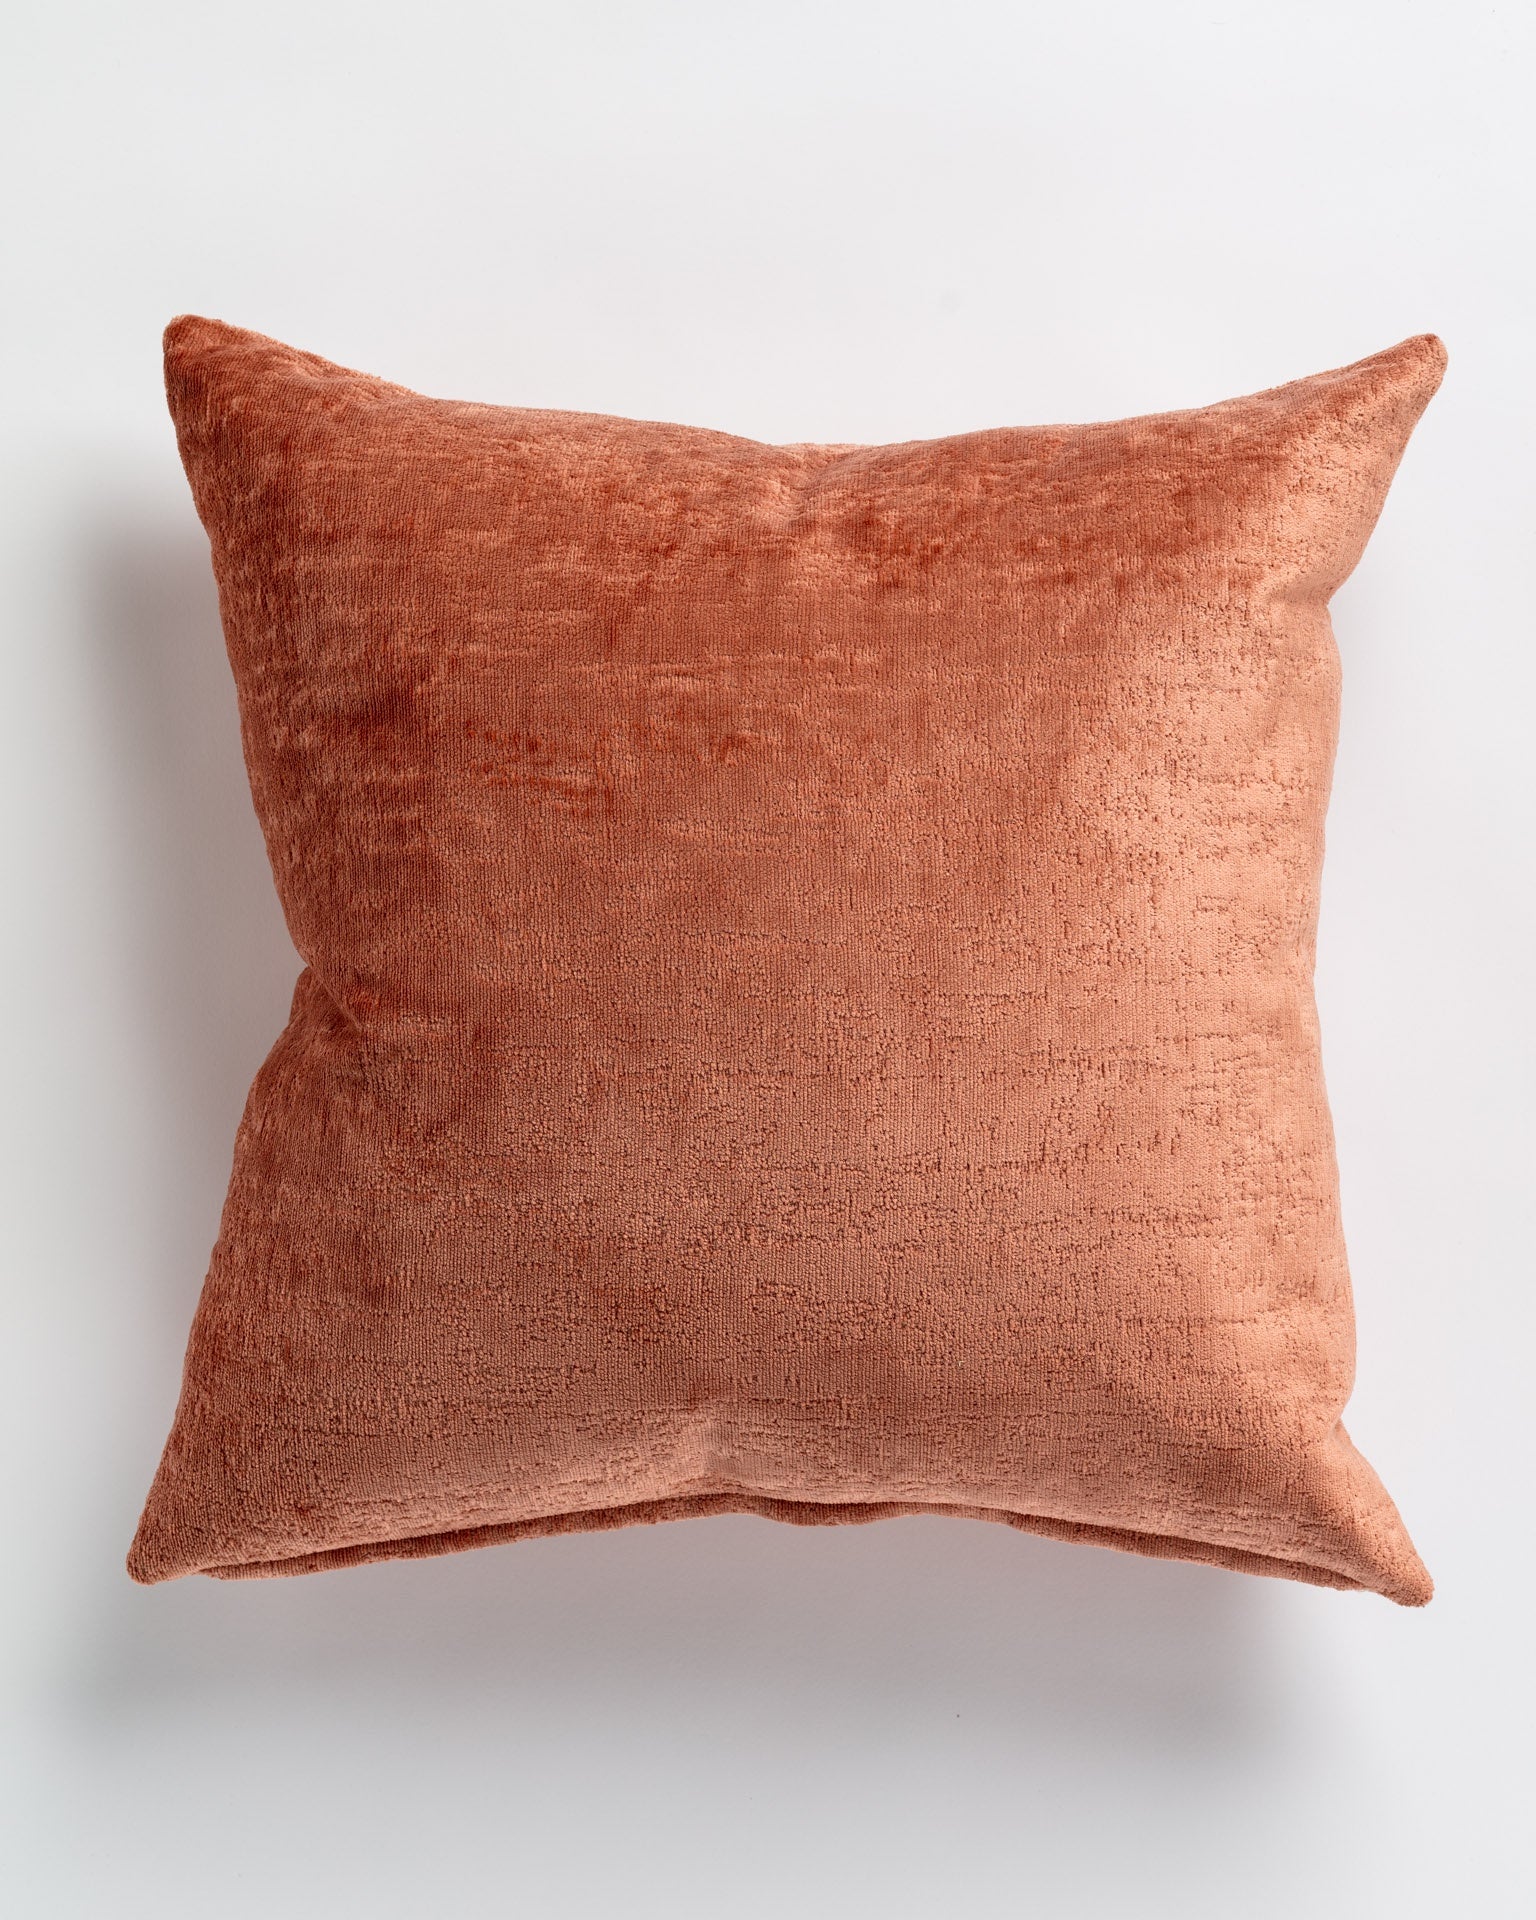 A soft, square-shaped Gabby Hamlet Terracotta Pillow 26x26 with a textured surface, photographed against a white background, encapsulating Arizona style.